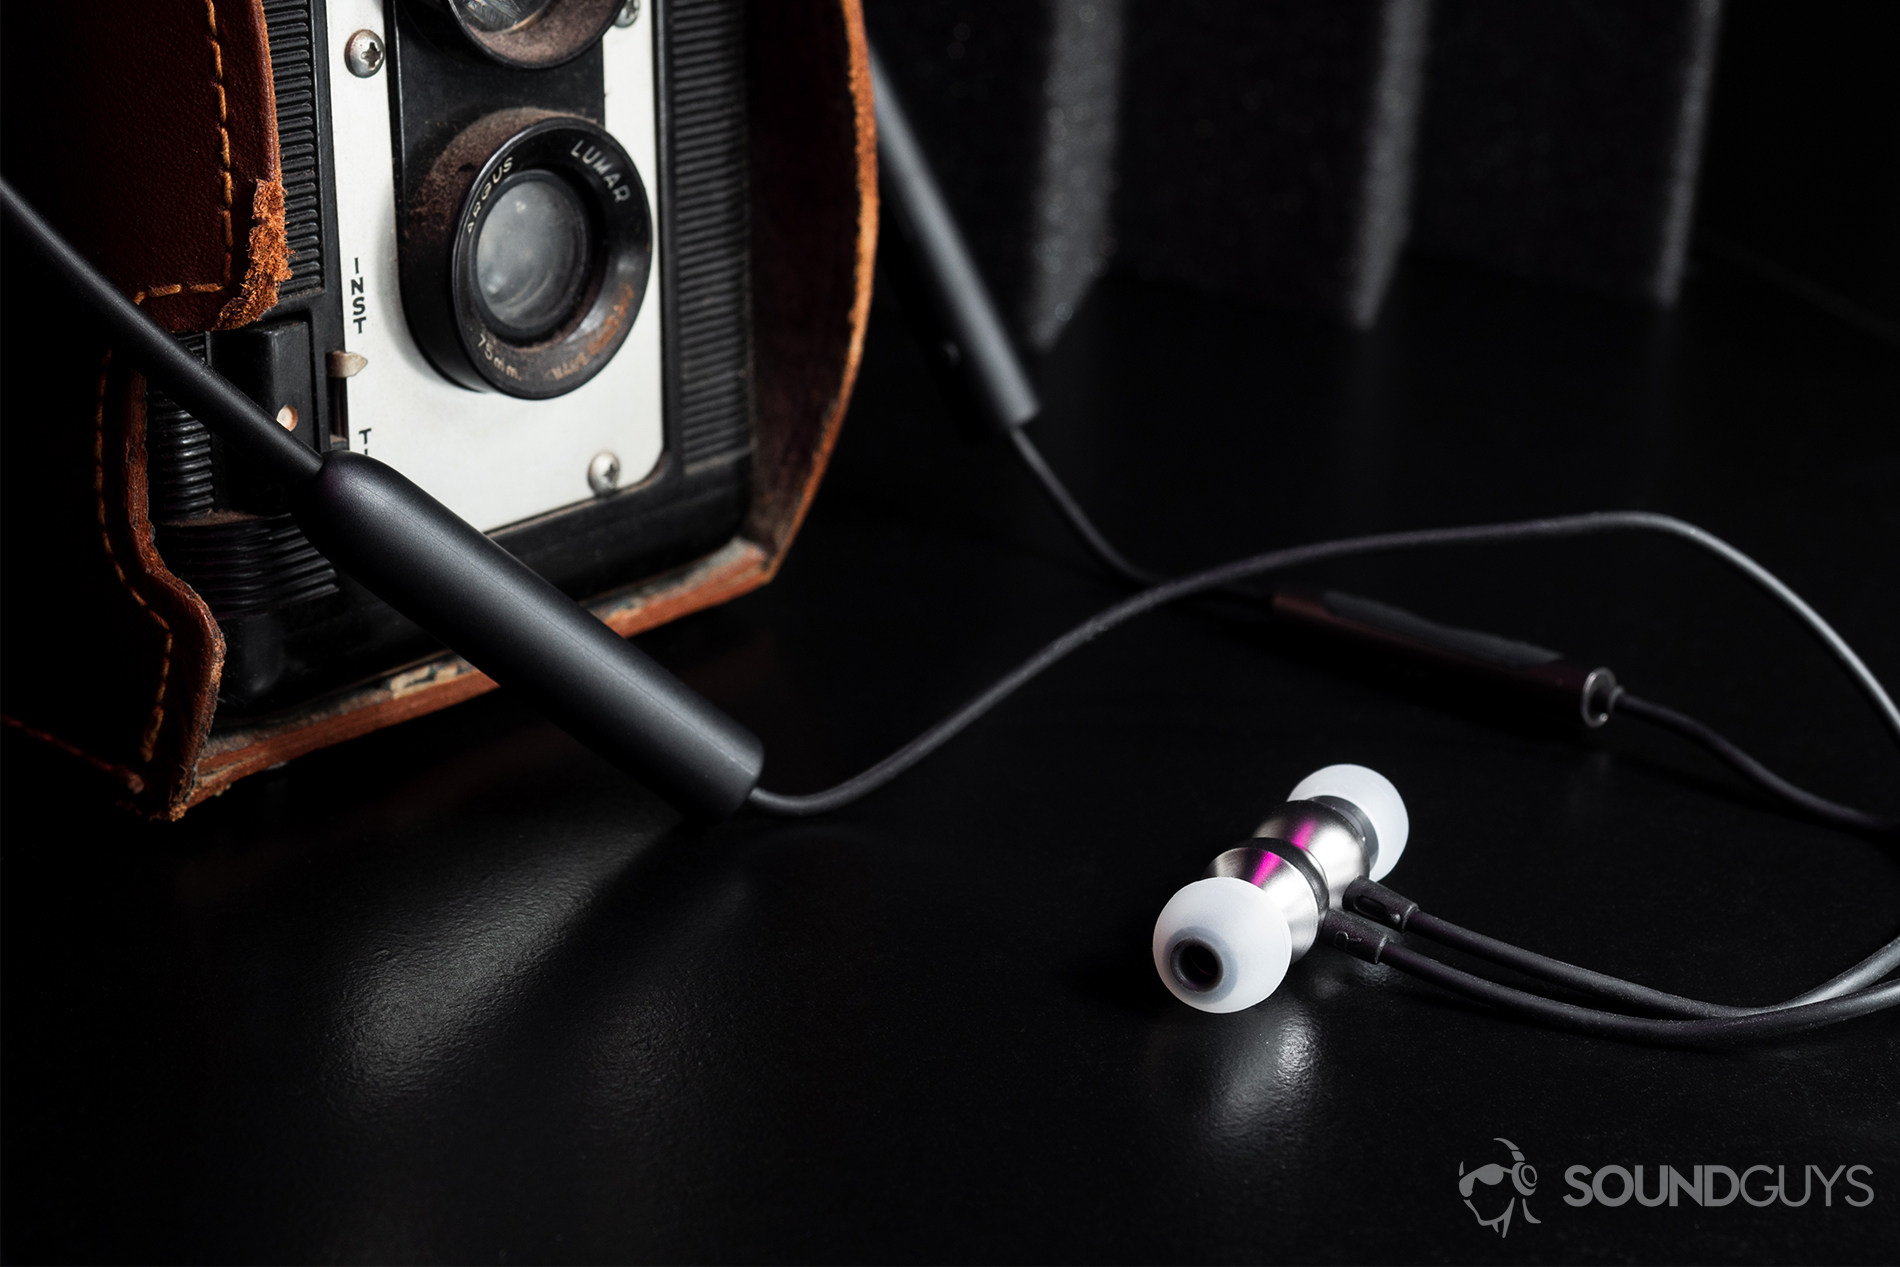 RHA MA390 Wireless: An image of the earbuds wrapped around a film camera. The earbuds are hooked together via the magnetic housings.